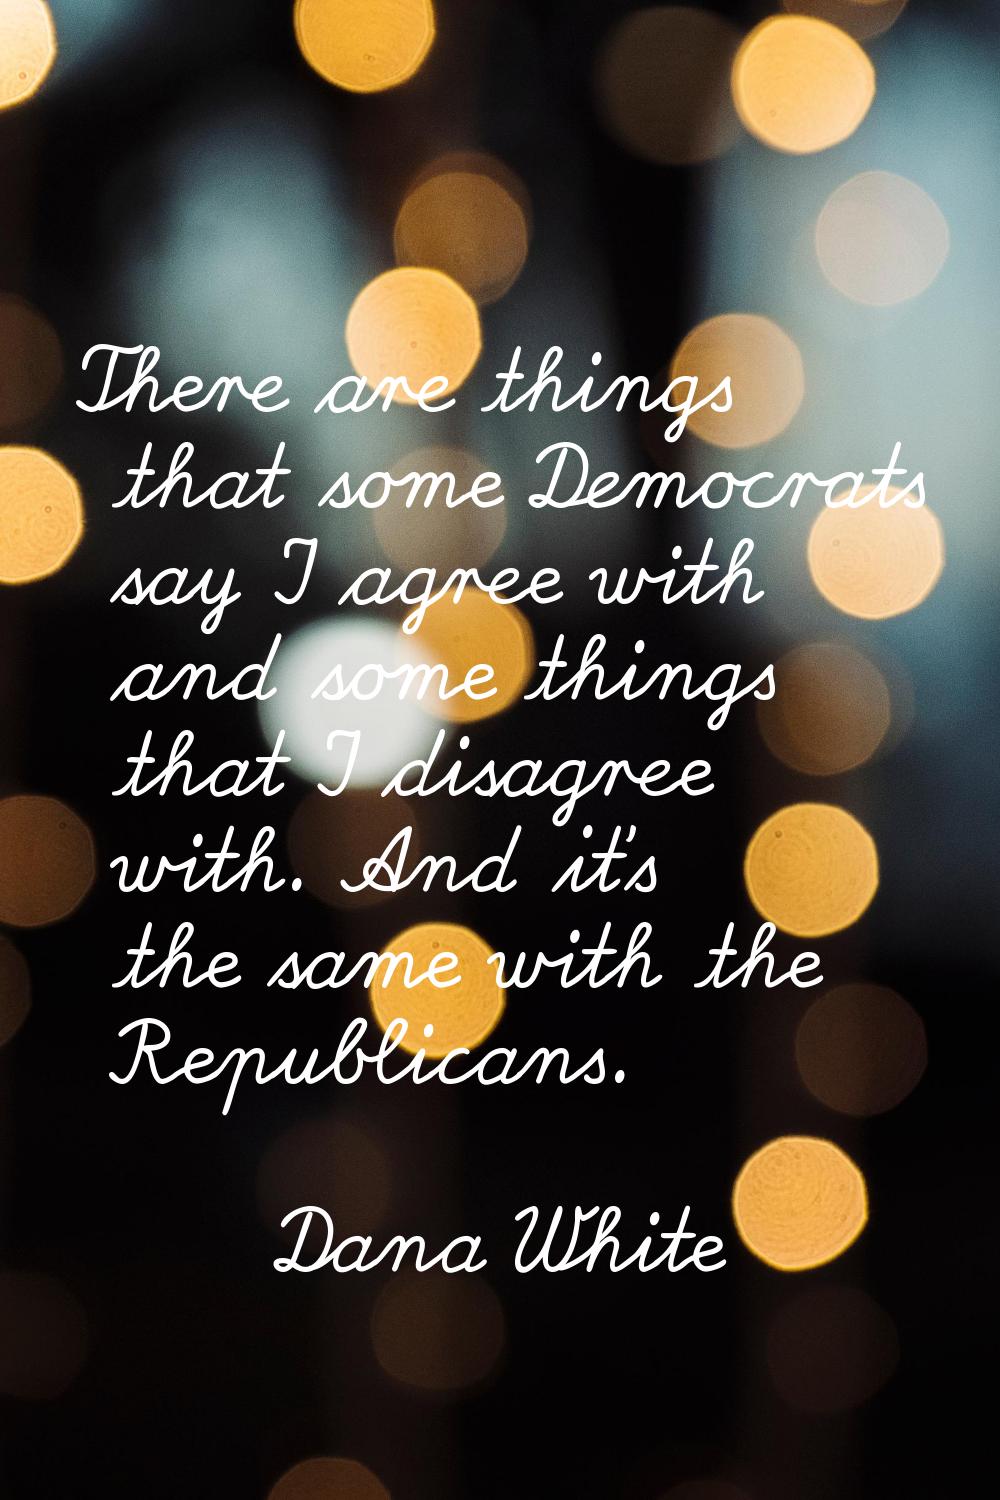 There are things that some Democrats say I agree with and some things that I disagree with. And it'